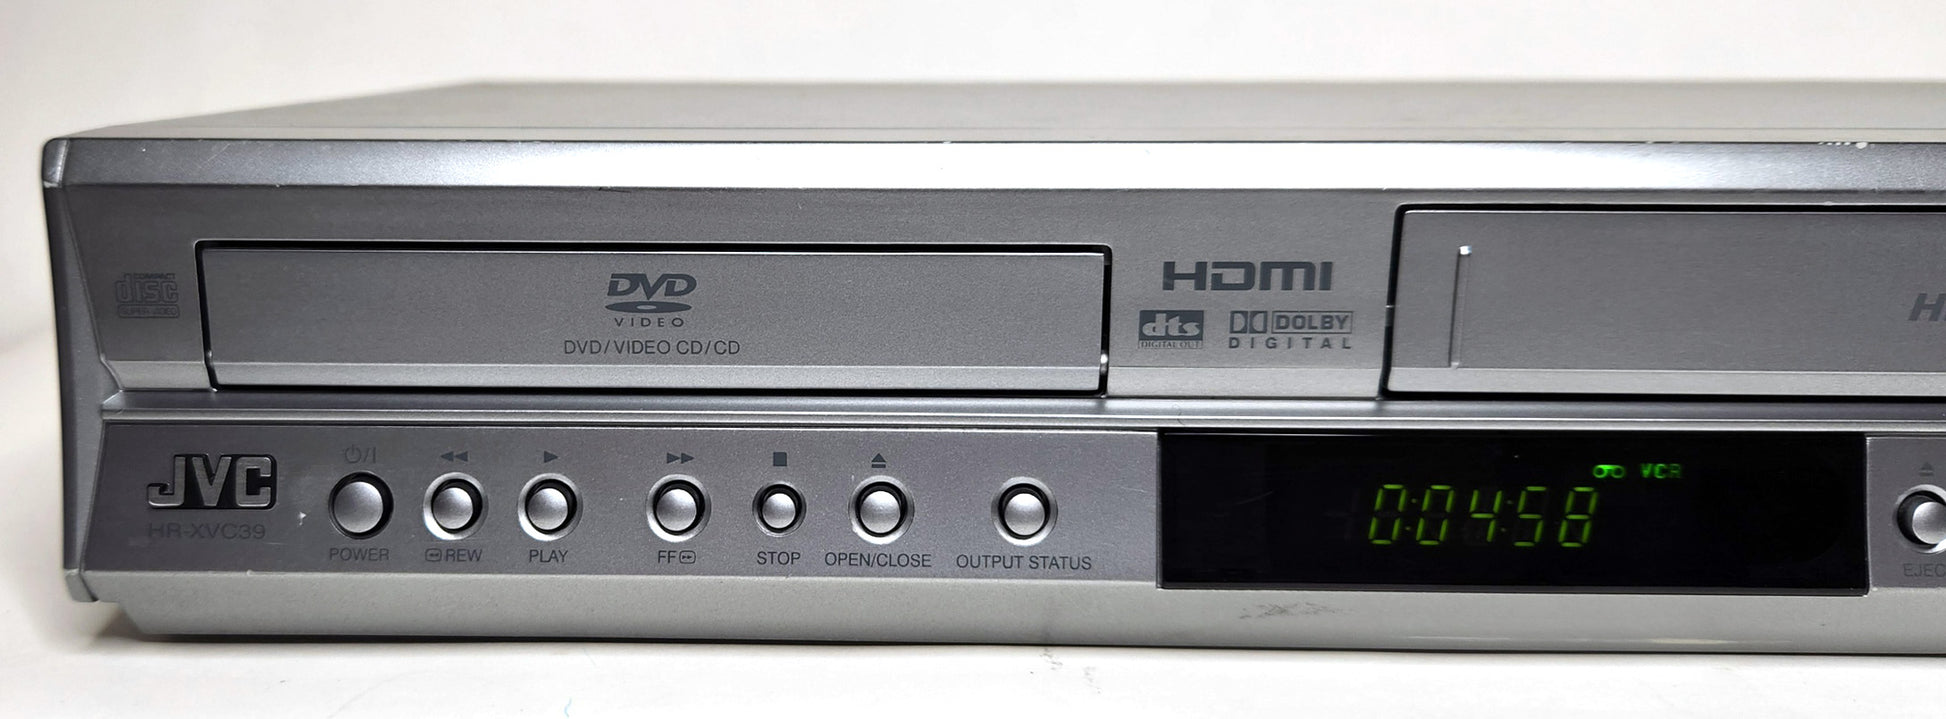 JVC HR-XVC39SU VCR/DVD Player Combo with HDMI - Left